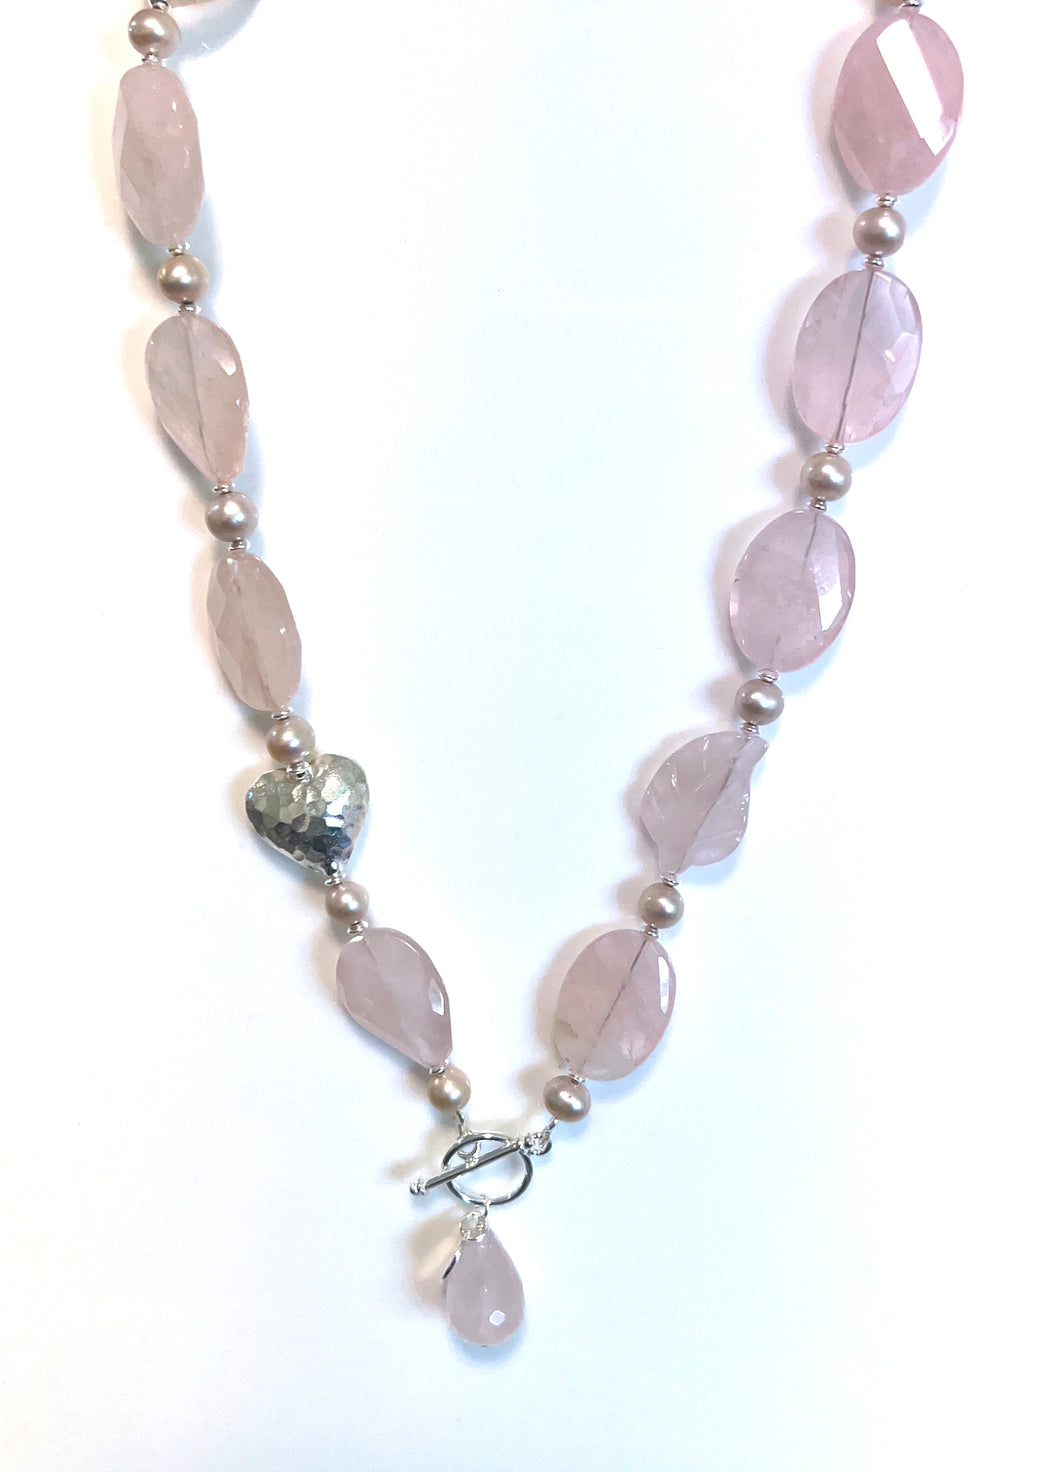 Australian Handmade Pink Necklace with Rose Quartz Natural Pink Pearls and Sterling Silver